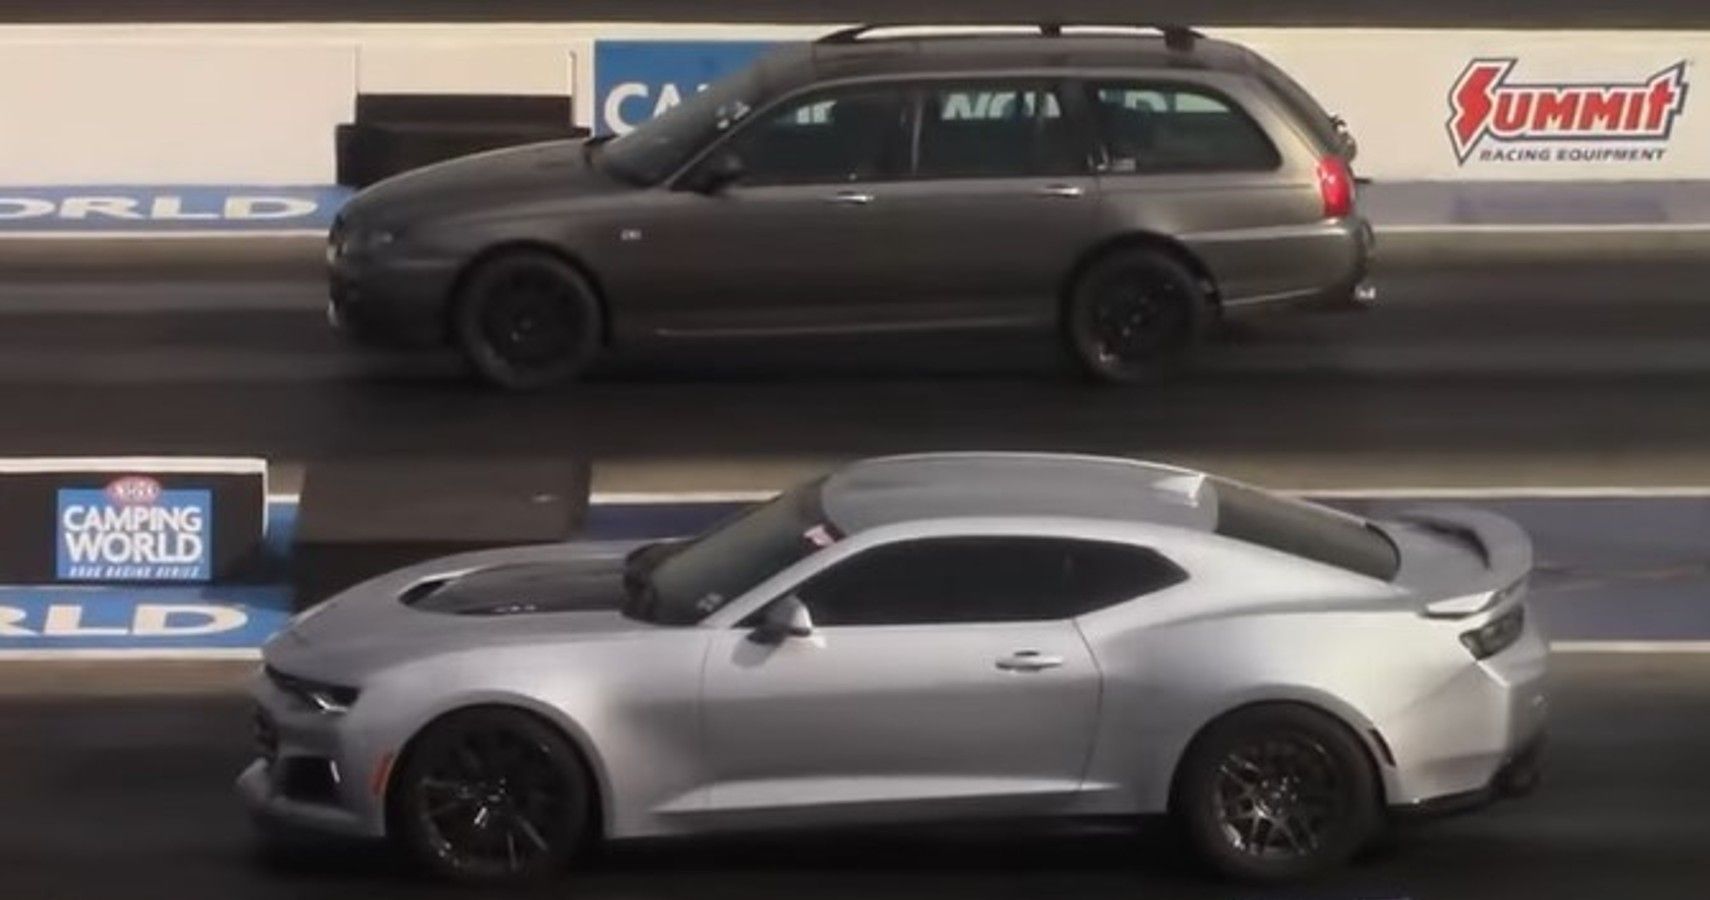 Brown MG ZT Station Wagon with a 5.0-liter coyote V8 swap and supercharger going against a silver Chevrolet Camaro ZL1 in a drag race